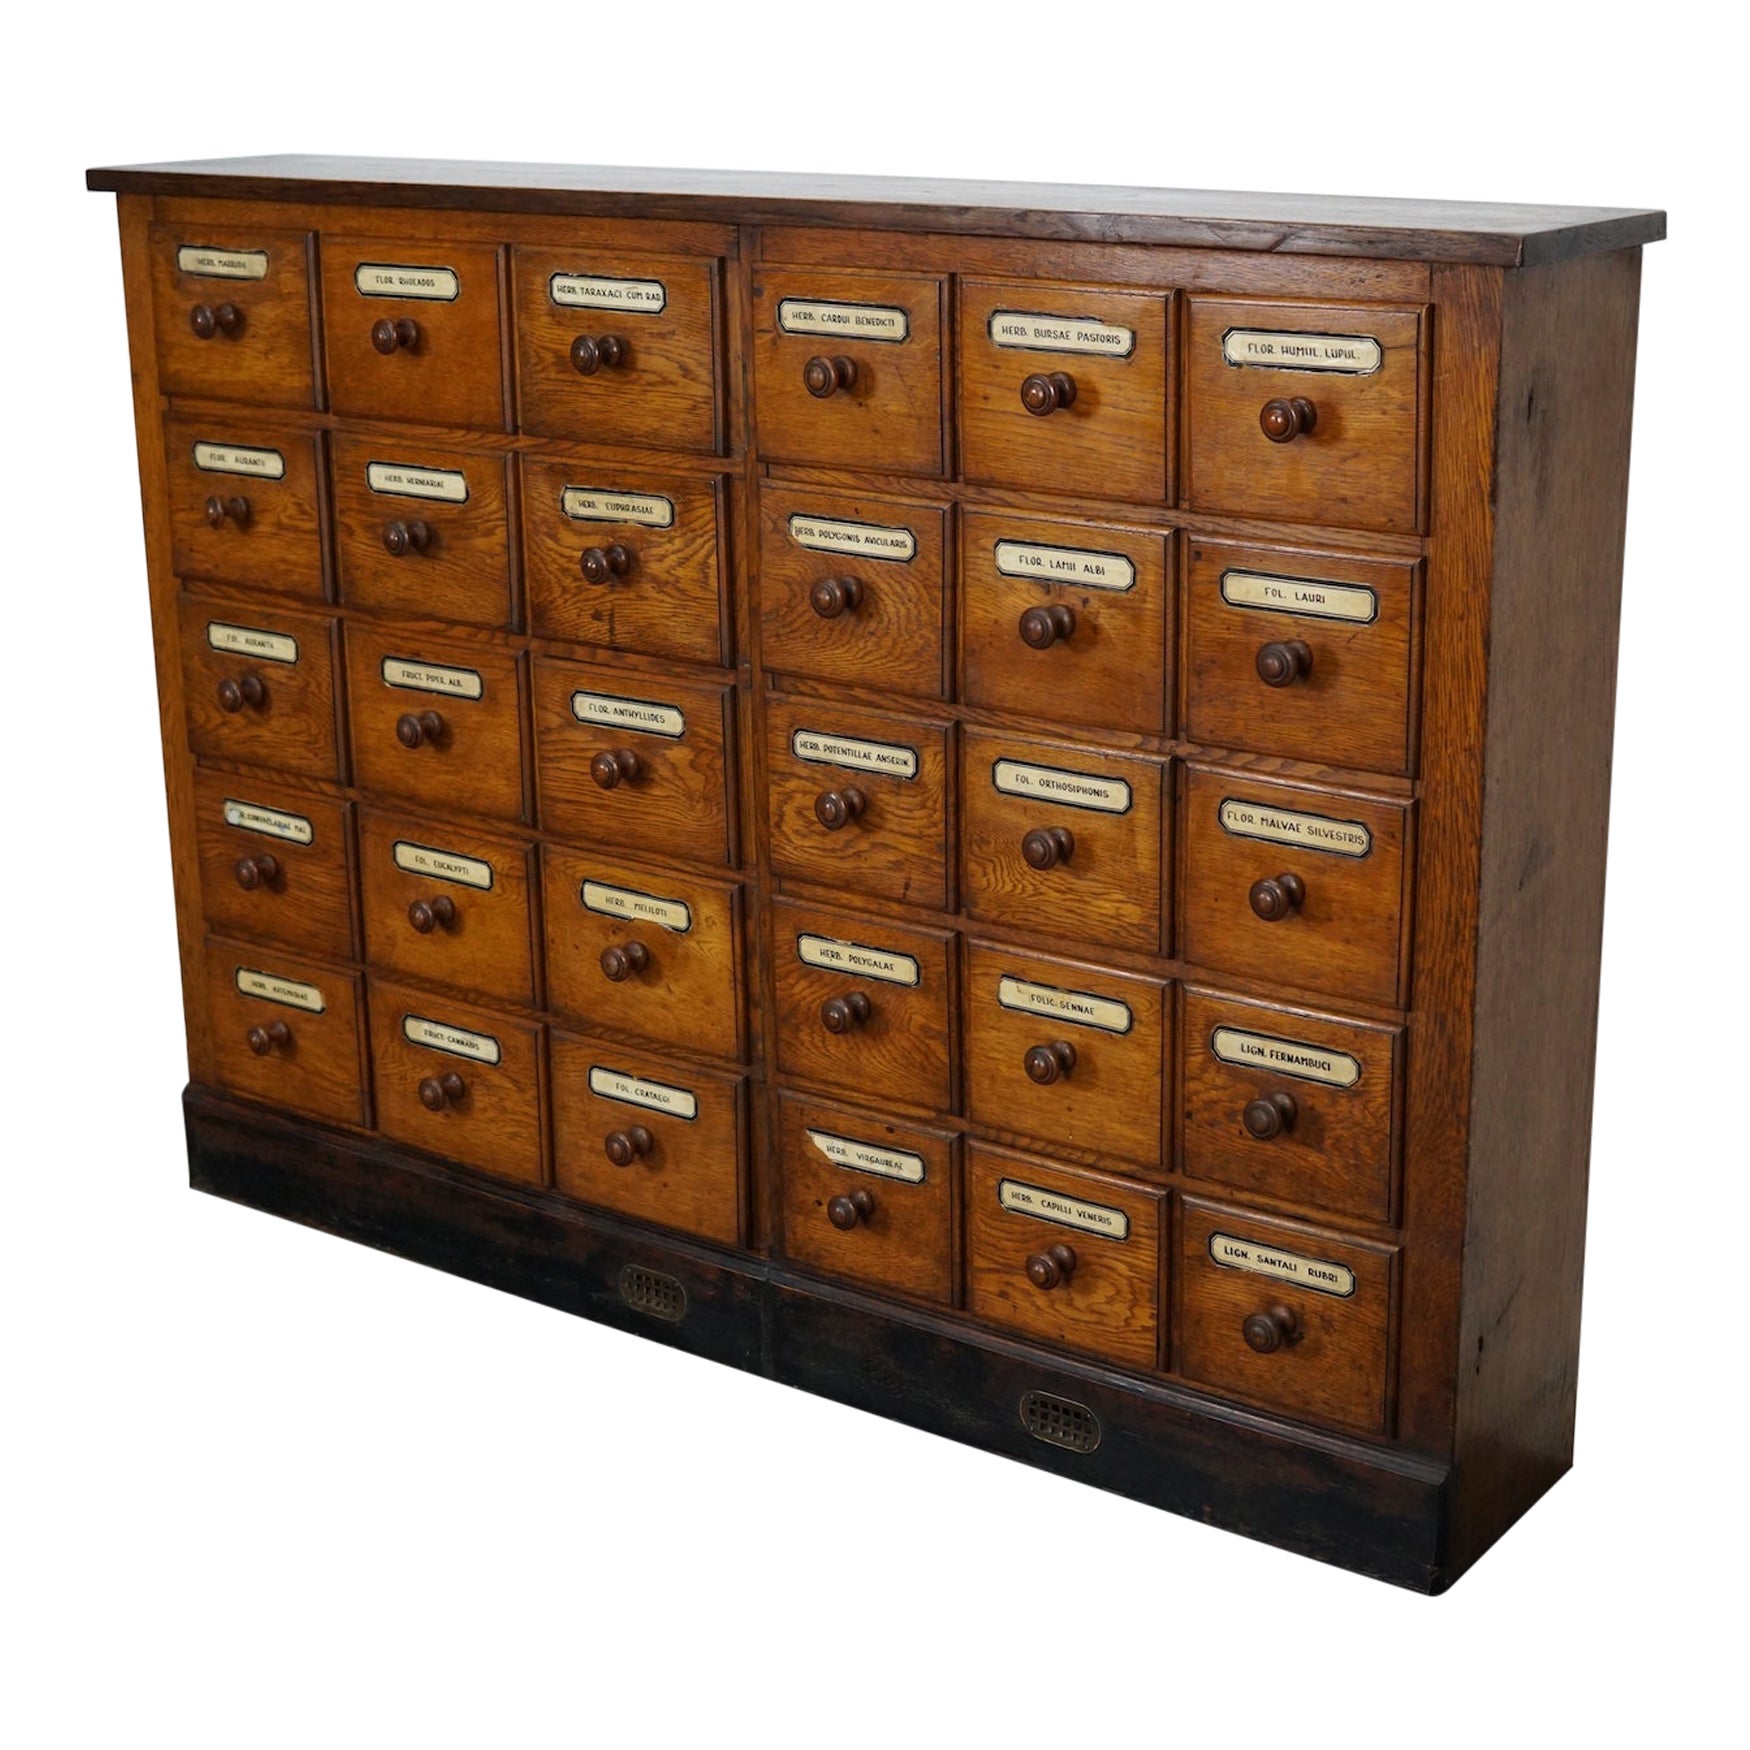 German Oak Apothecary Cabinet or Bank of Drawers, Early 20th Century